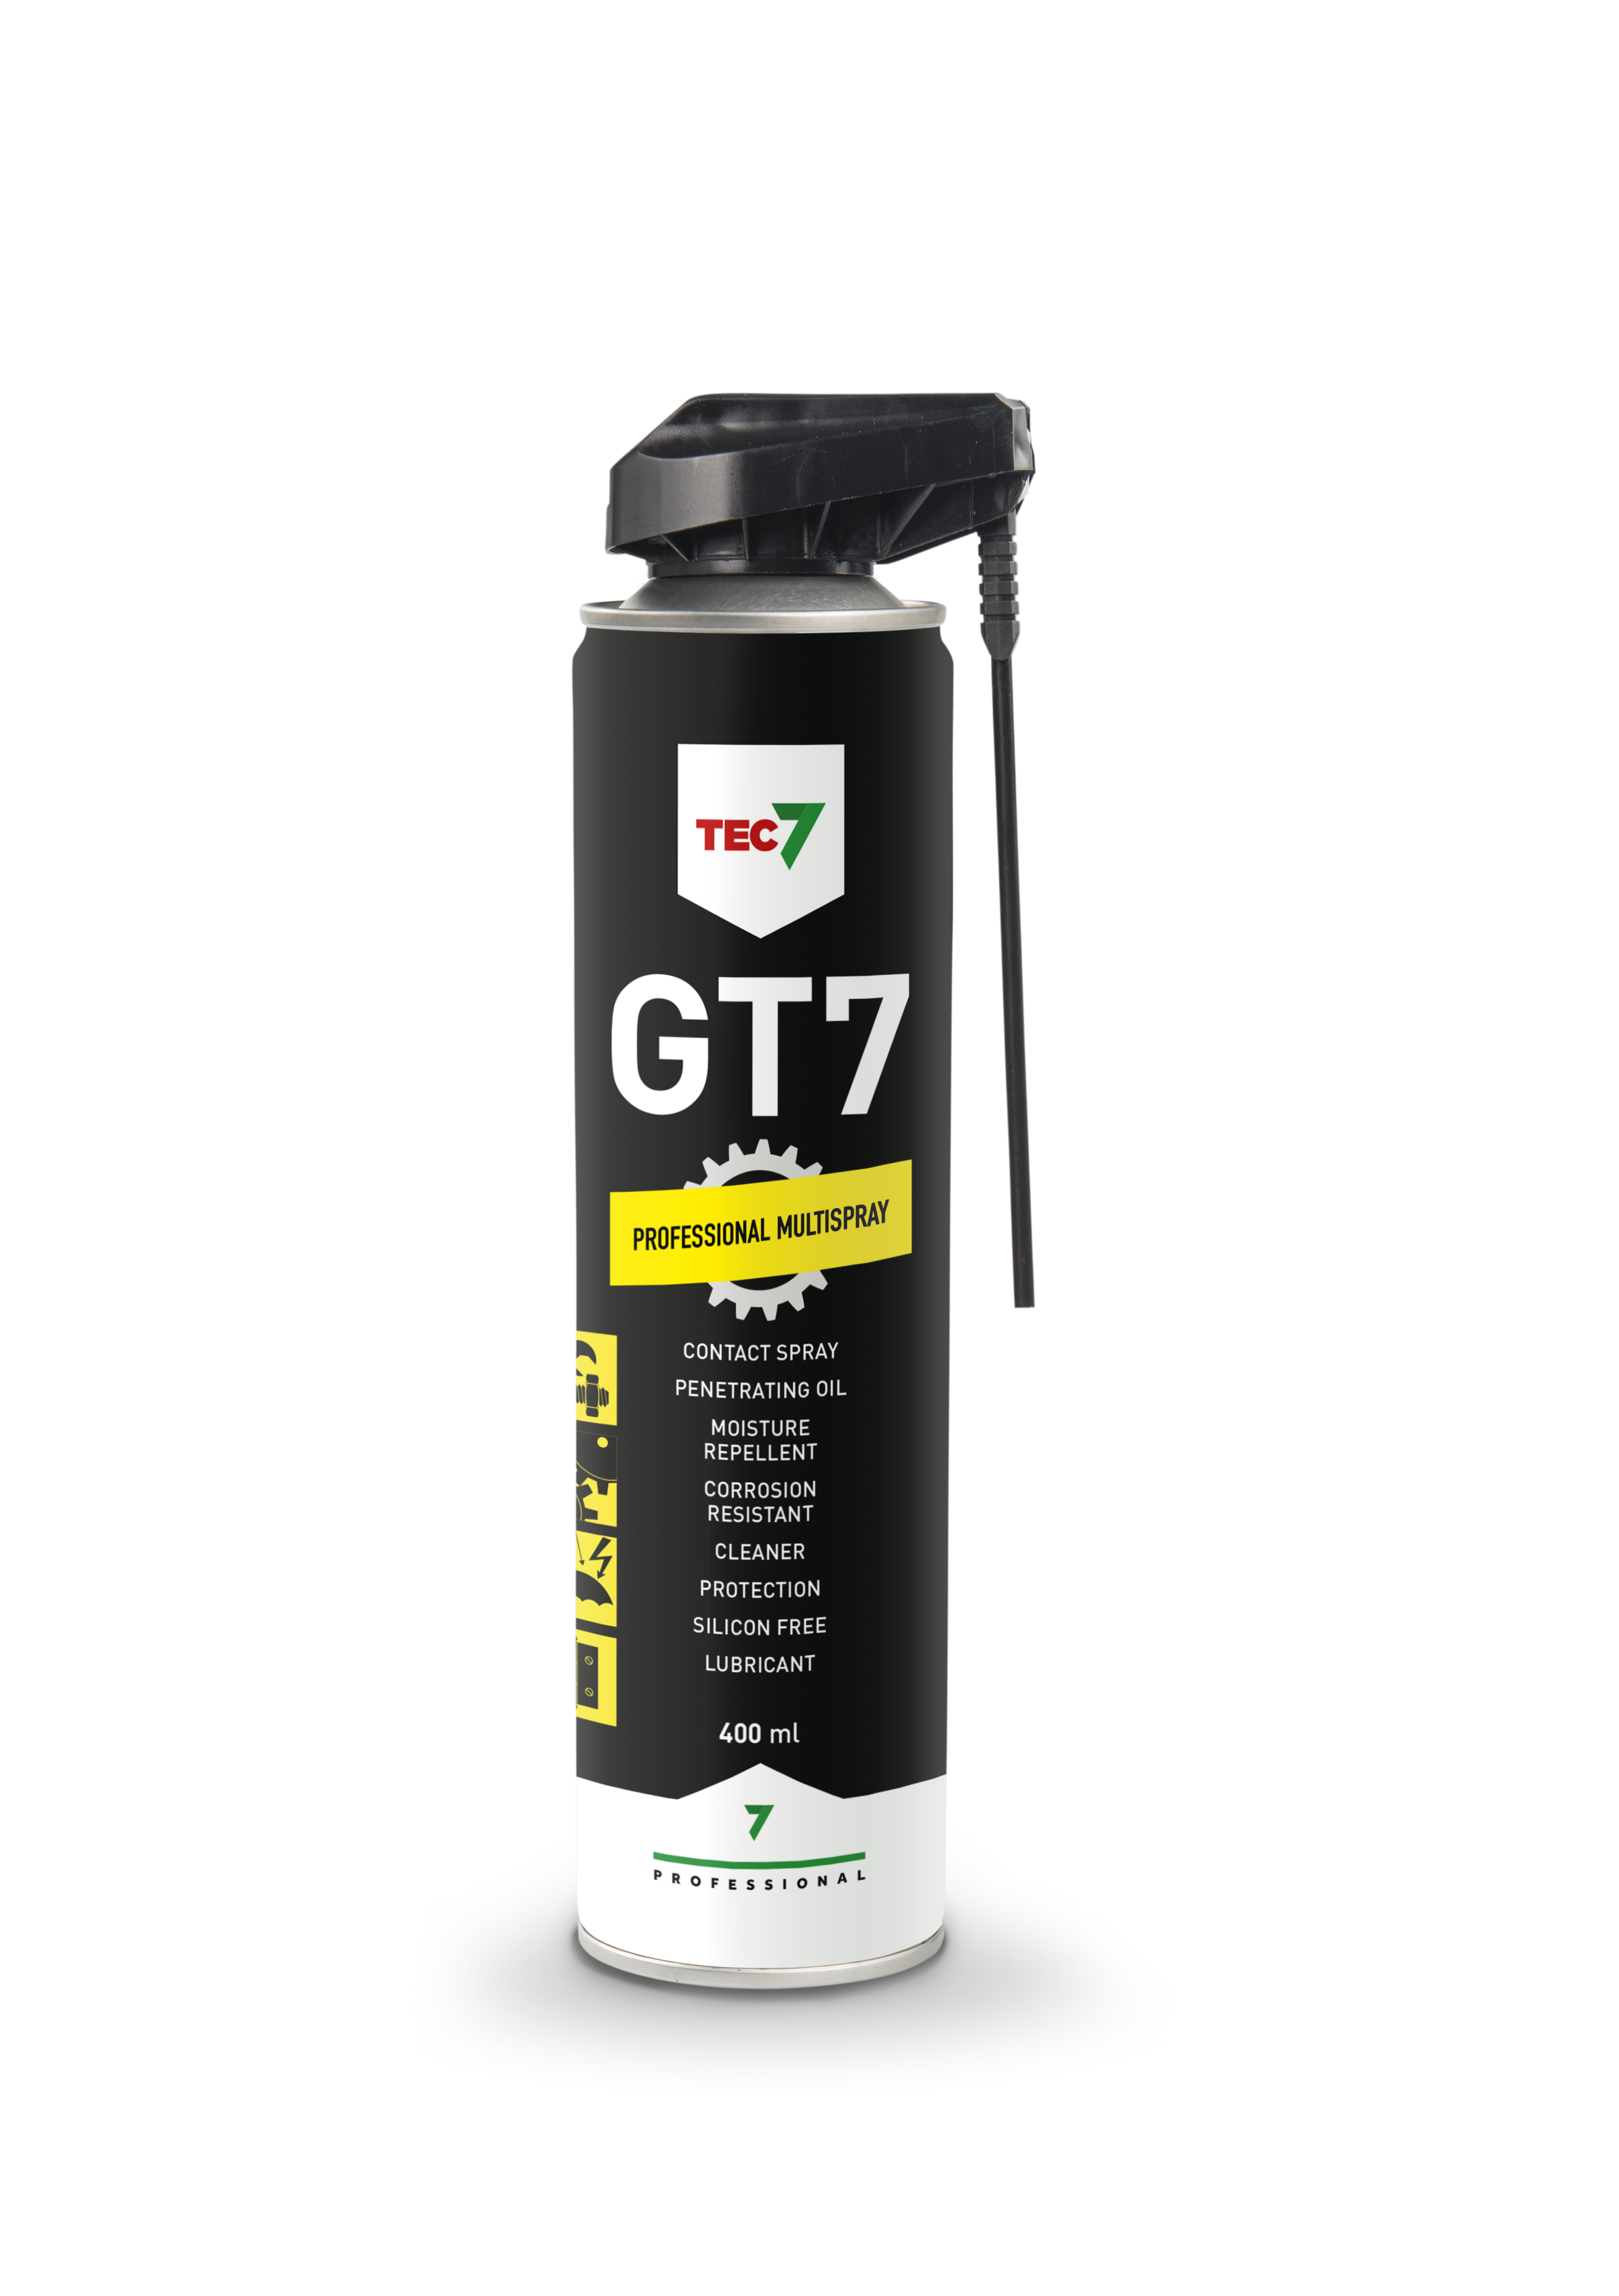 GT7 – More than just a Penetrating Oil